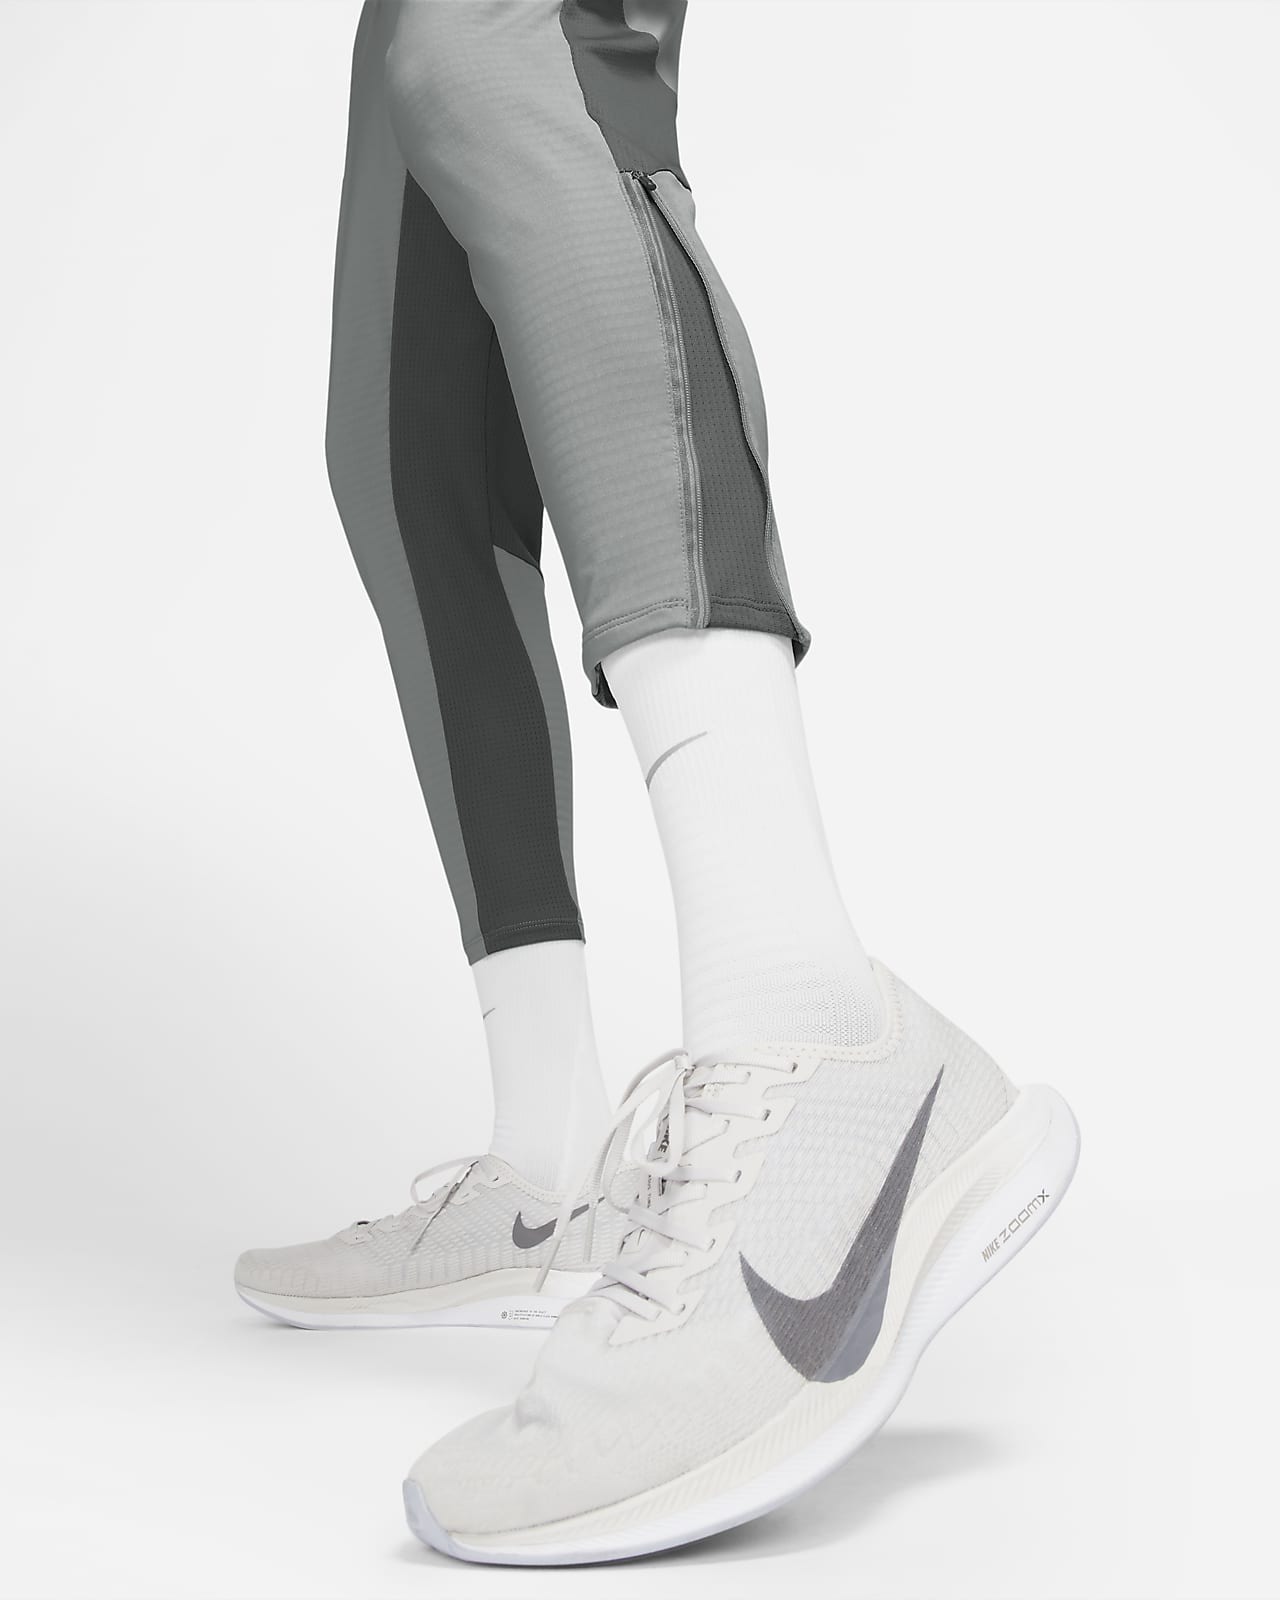 Nike Dri-fit Phenom Elite Knit Trail Running Pants in Natural for